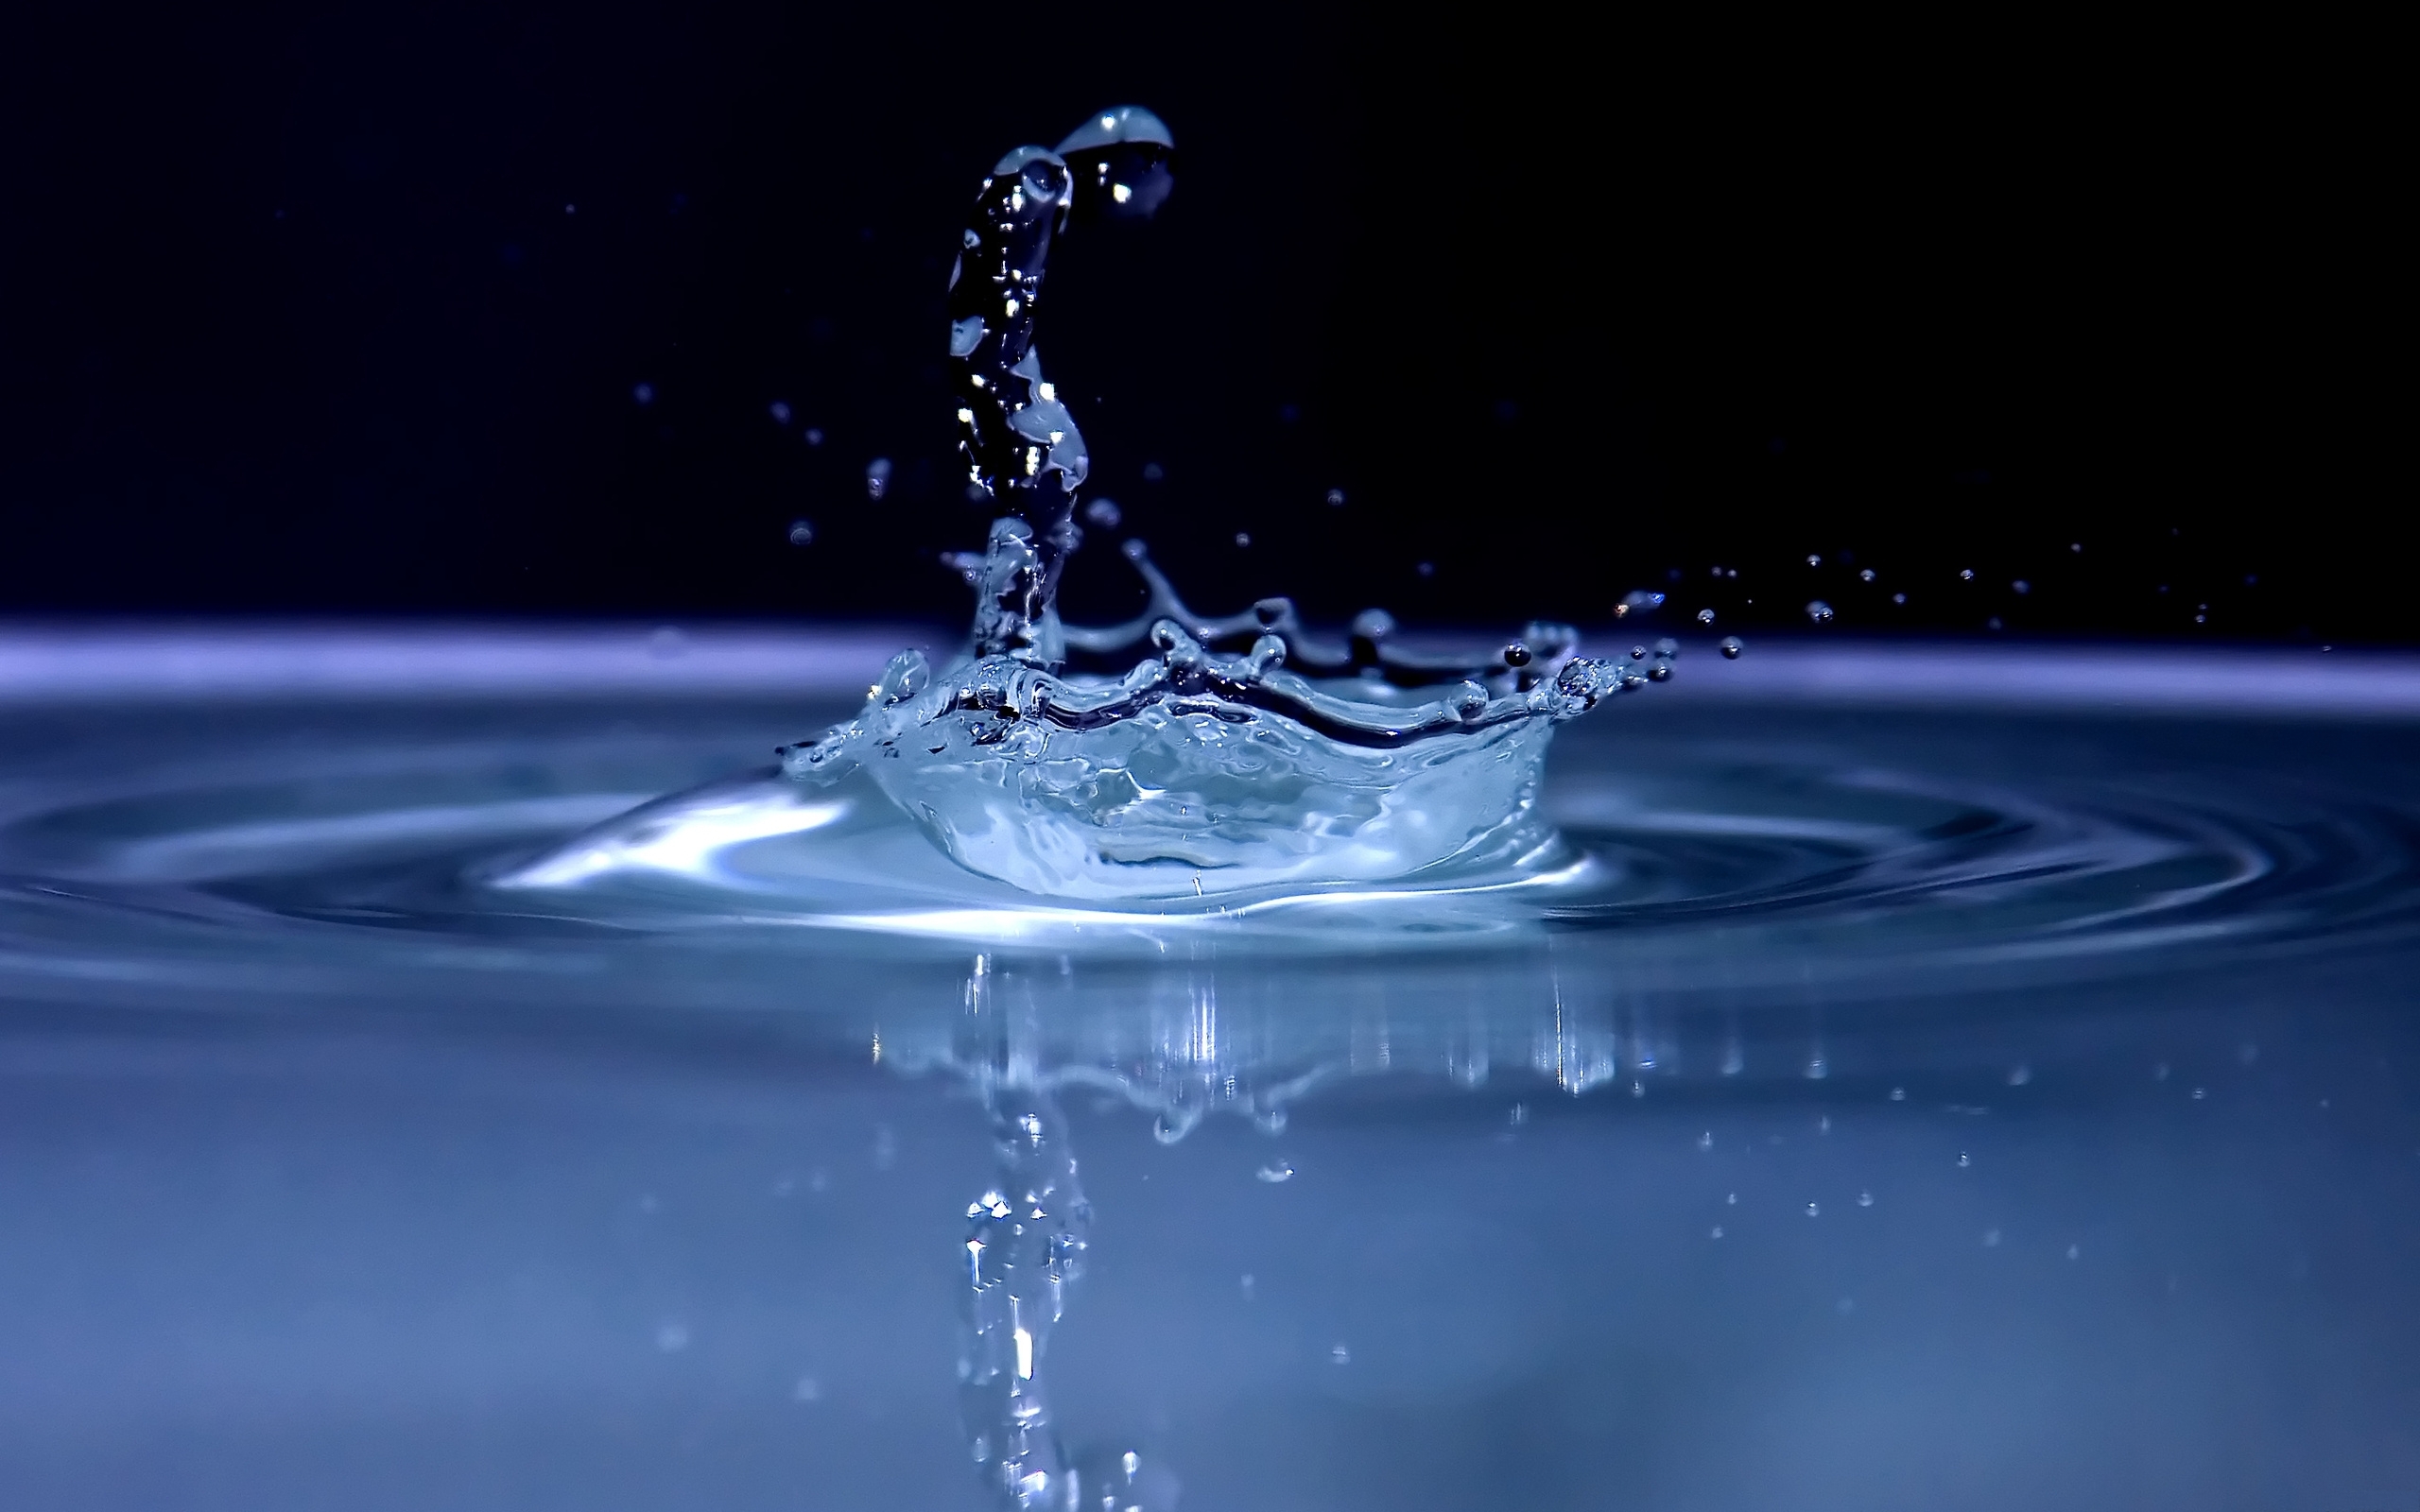 HQ Definition Water Drop Hd Wallpapers Archives (44) - BsnSCB.com